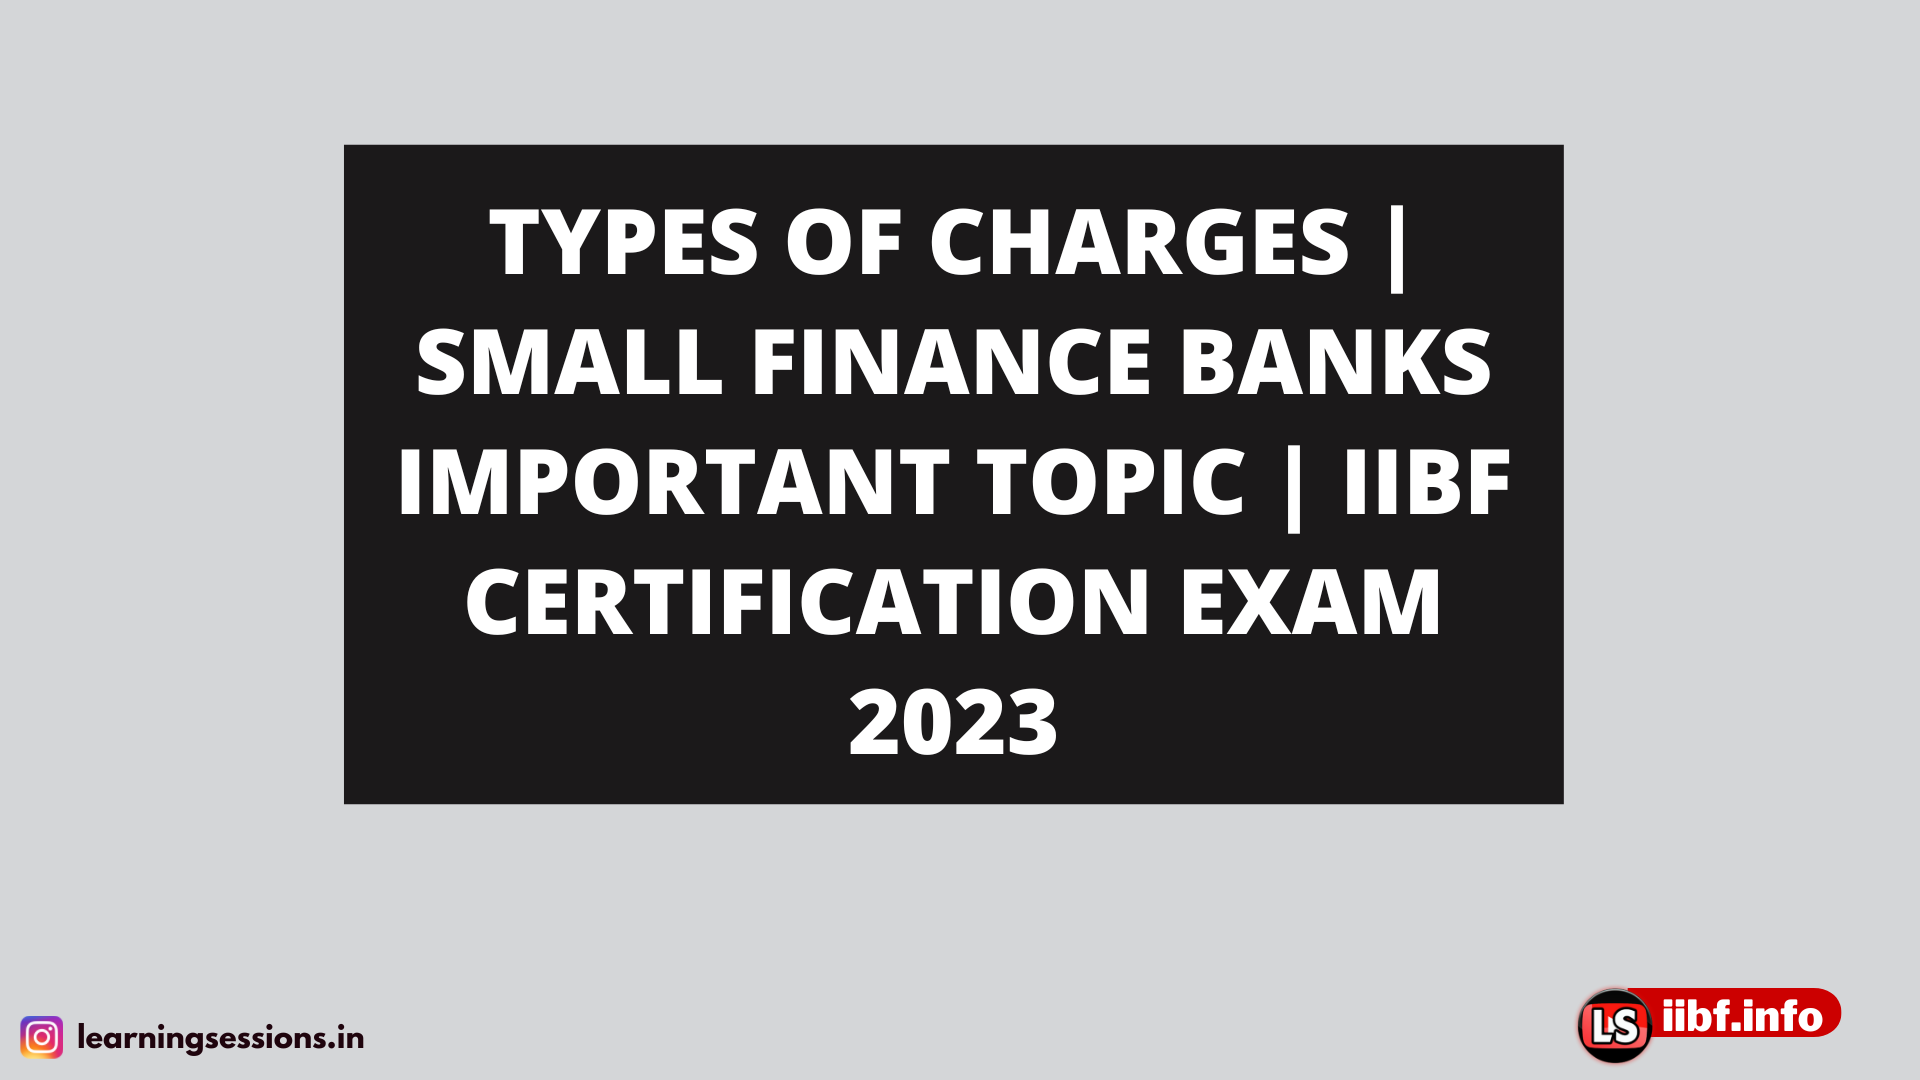 TYPES OF CHARGES | SMALL FINANCE BANKS IMPORTANT TOPIC | IIBF CERTIFICATION EXAM 2023